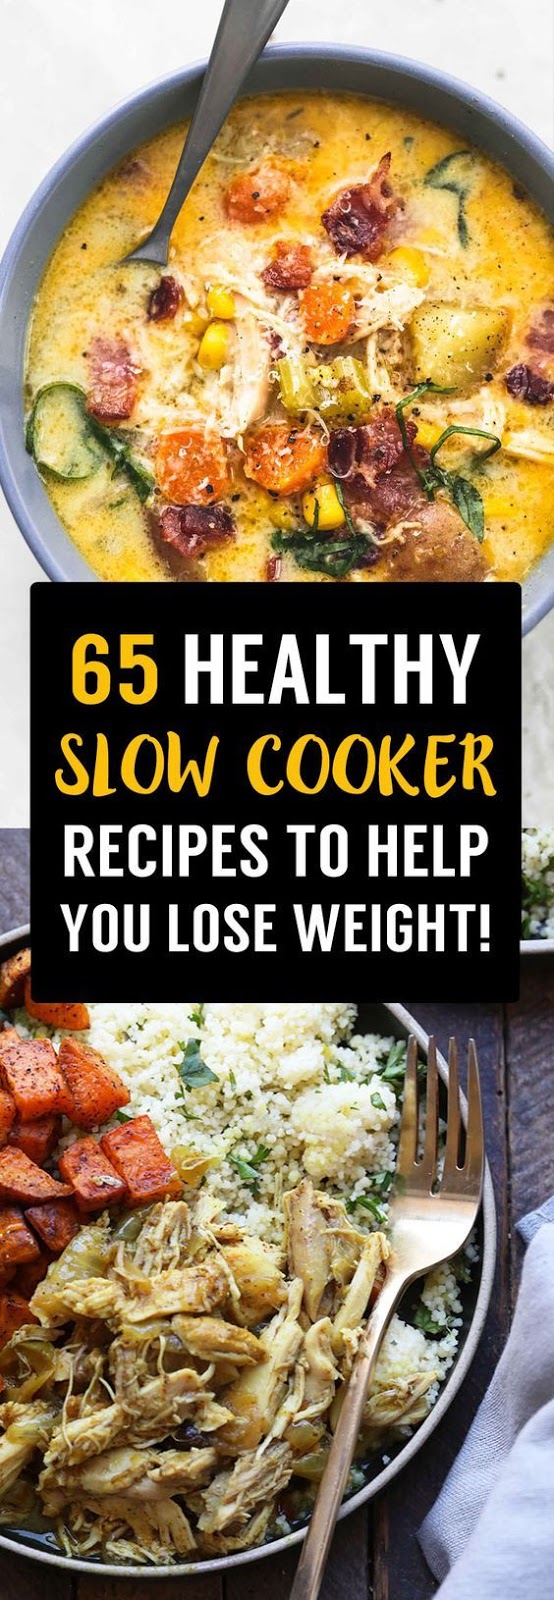 If you haven’t got a slow cooker, go and pick one up today. The basic ones are cheap, easy to use and can be a real game changer in your diet plans. Minimal prep, minimal clean up, minimal effort, maximum results. The slow cooker can make some incredible, healthy, weight loss meals that you can